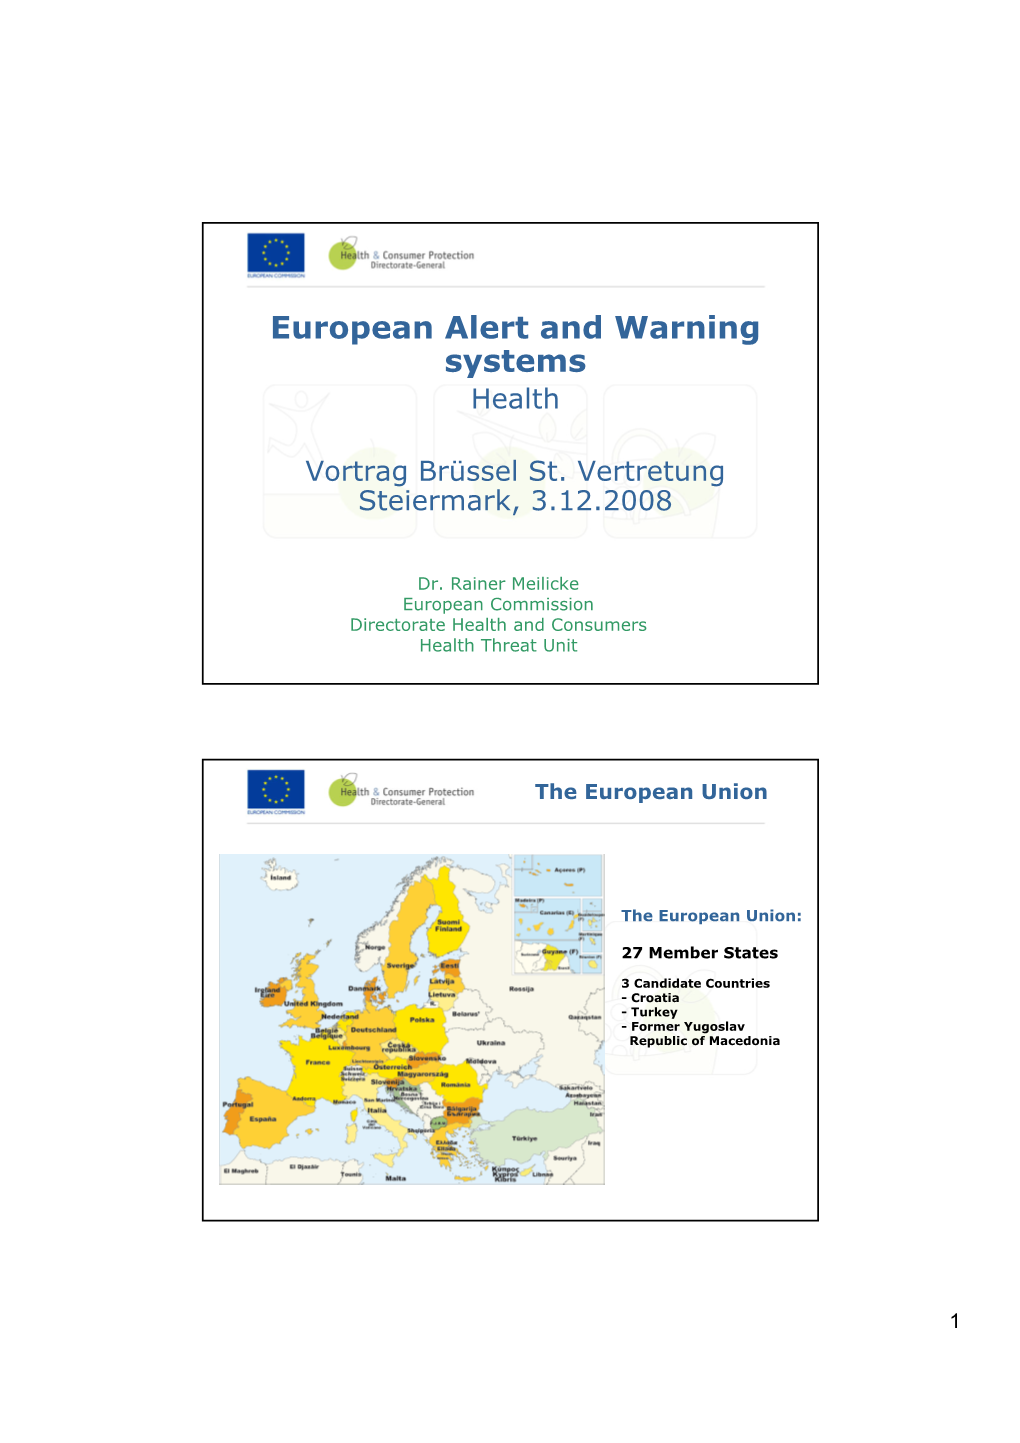 European Alert and Warning Systems Health